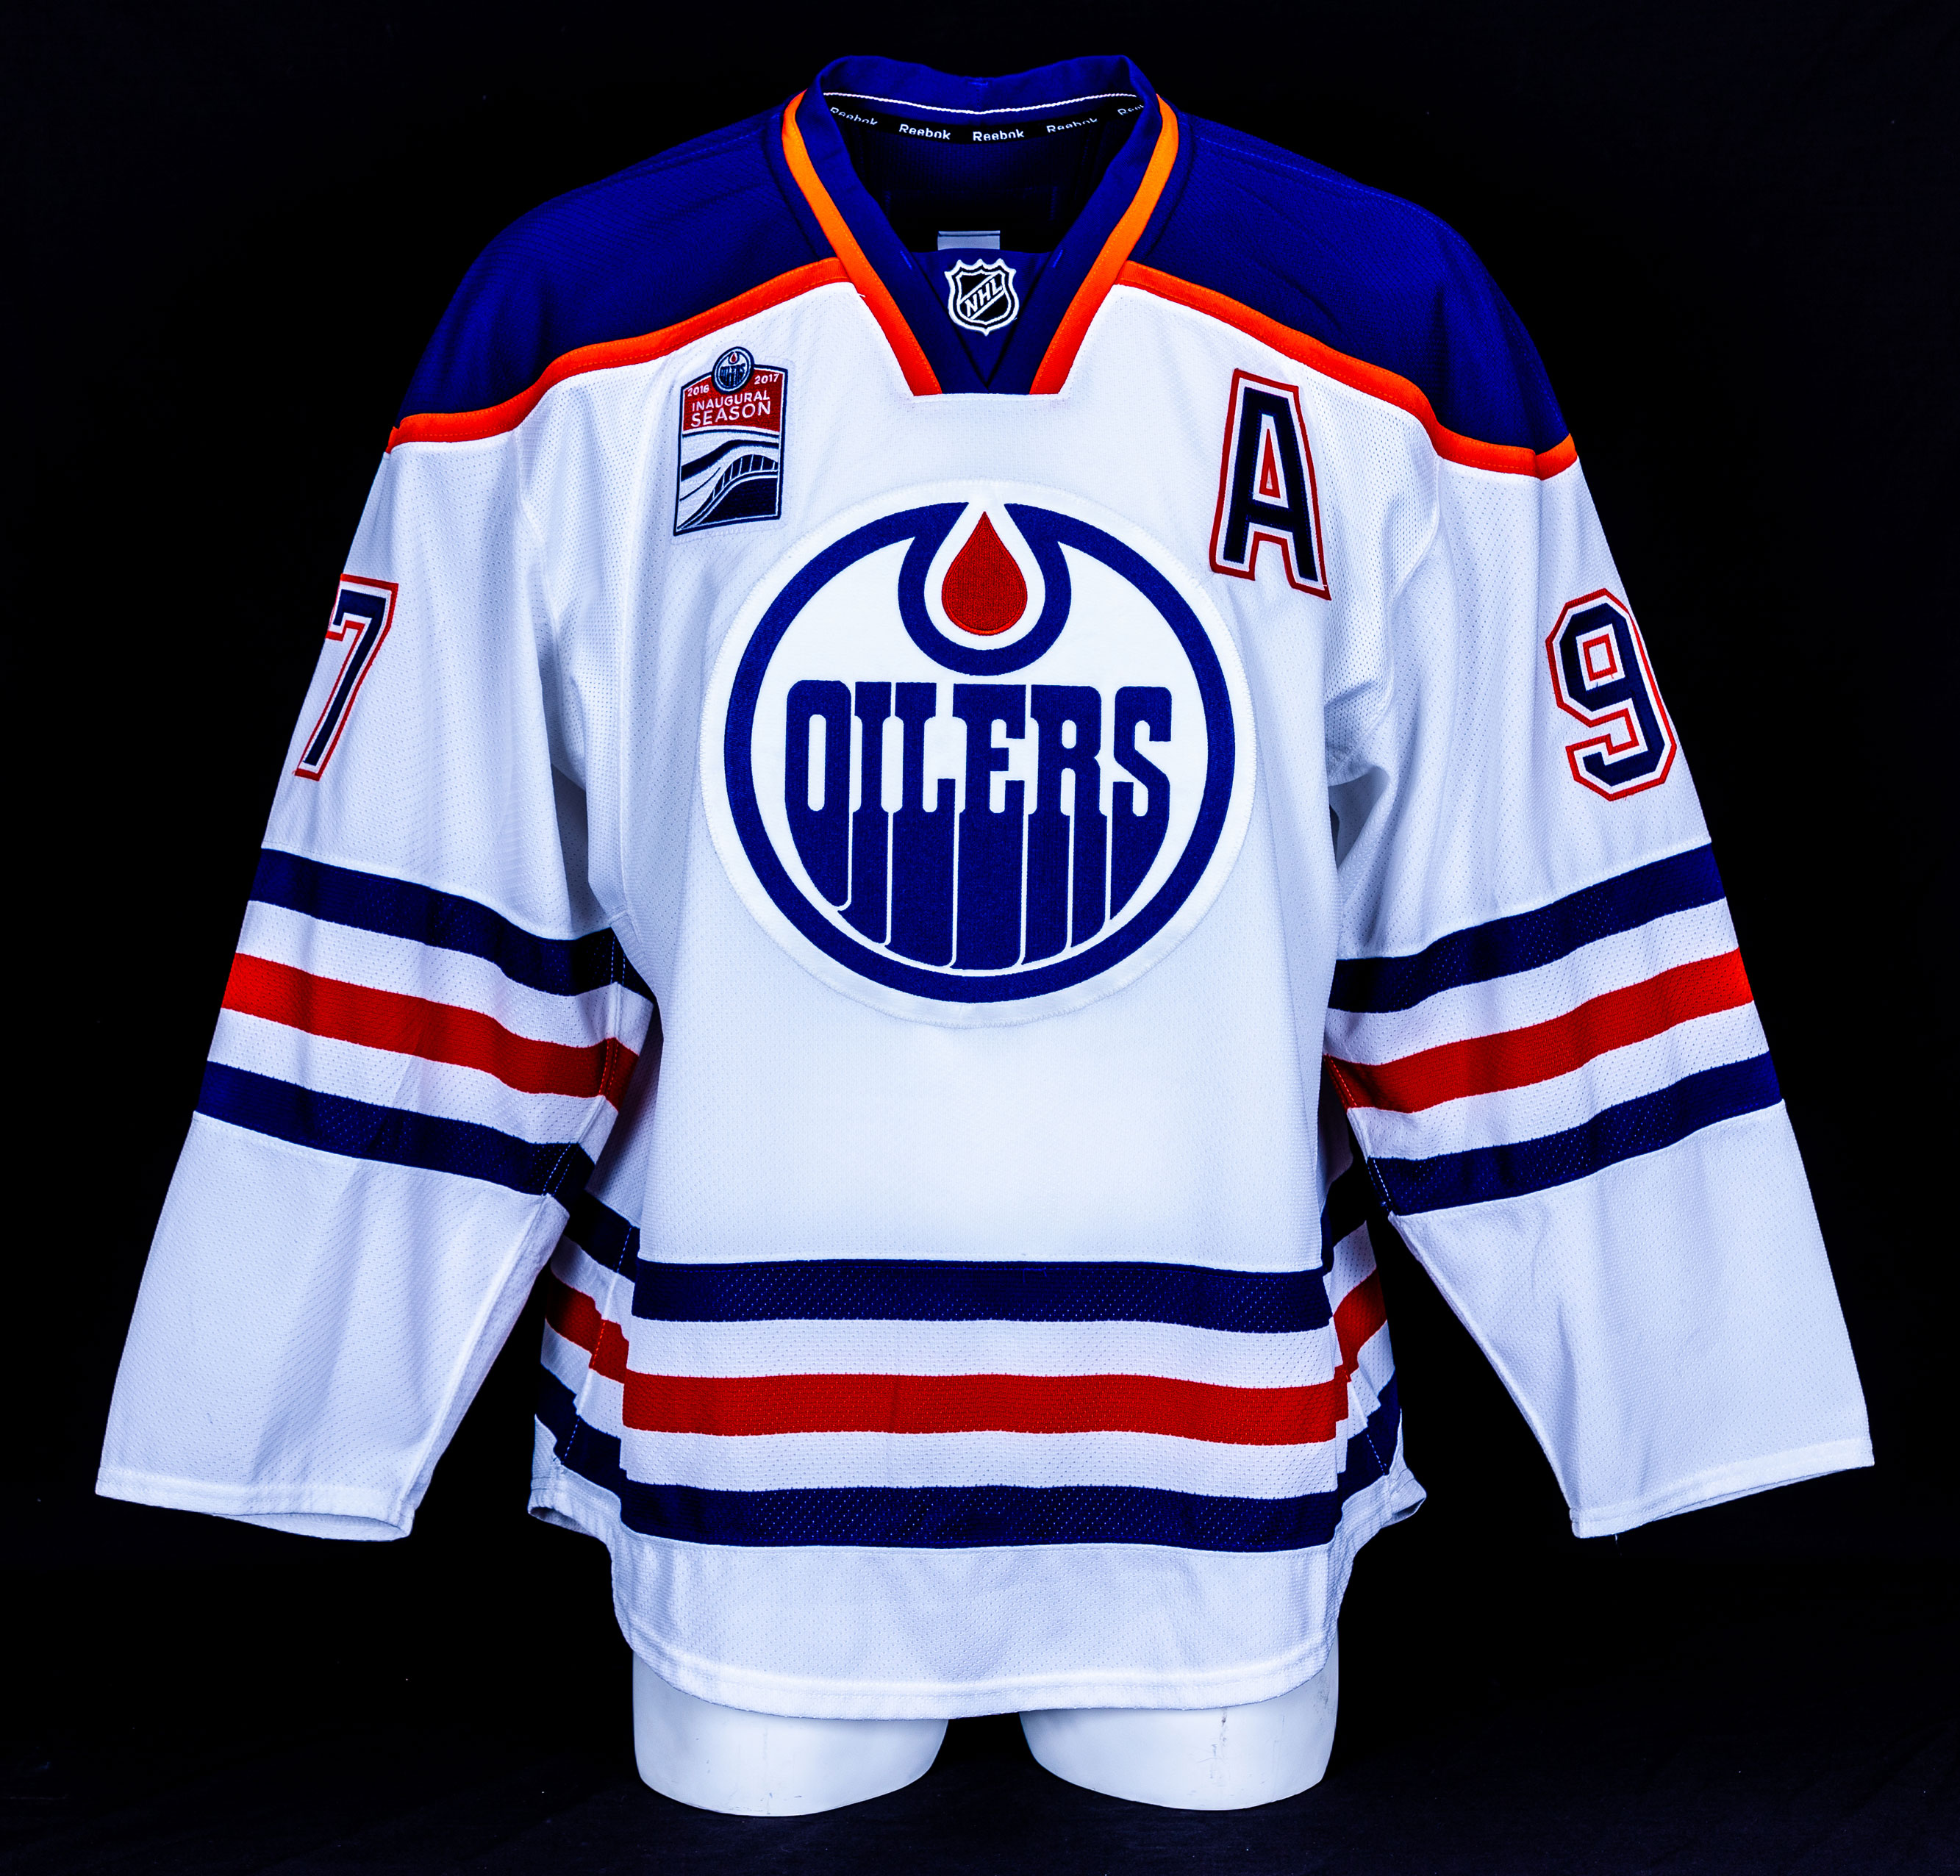 Edmonton Oilers Inaugural Season Jersey Patch at Rogers Place 2016